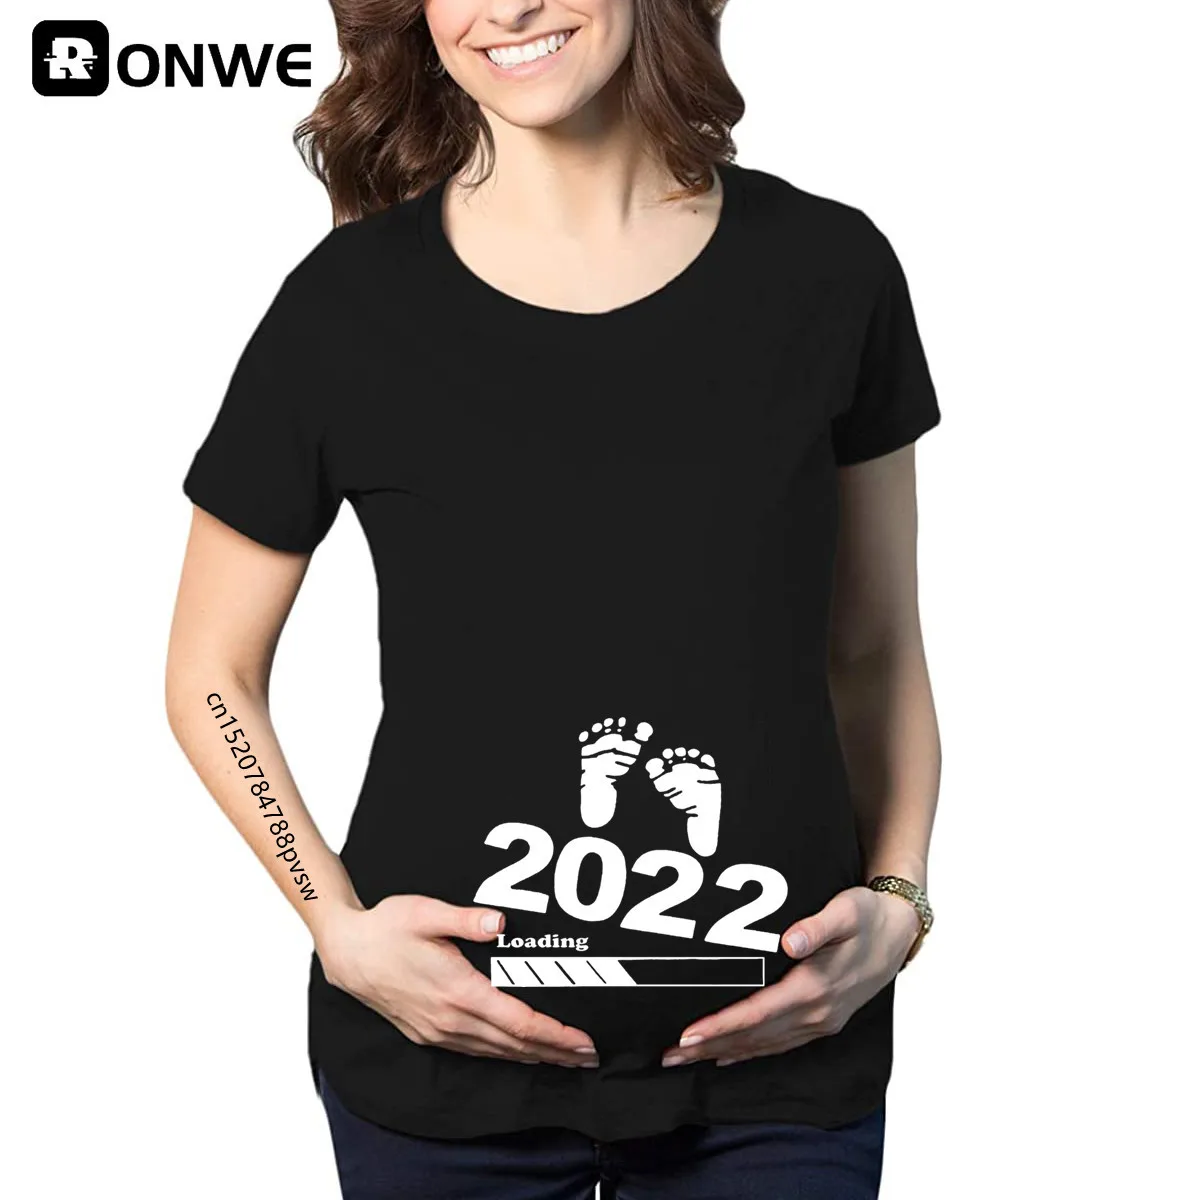 Pregnant Baby Loading 2022 Funny Women T Shirt Girl Maternity Pregnancy Announcement Shirt New Mom Big Size Clothes,Drop Ship black and white striped shirt